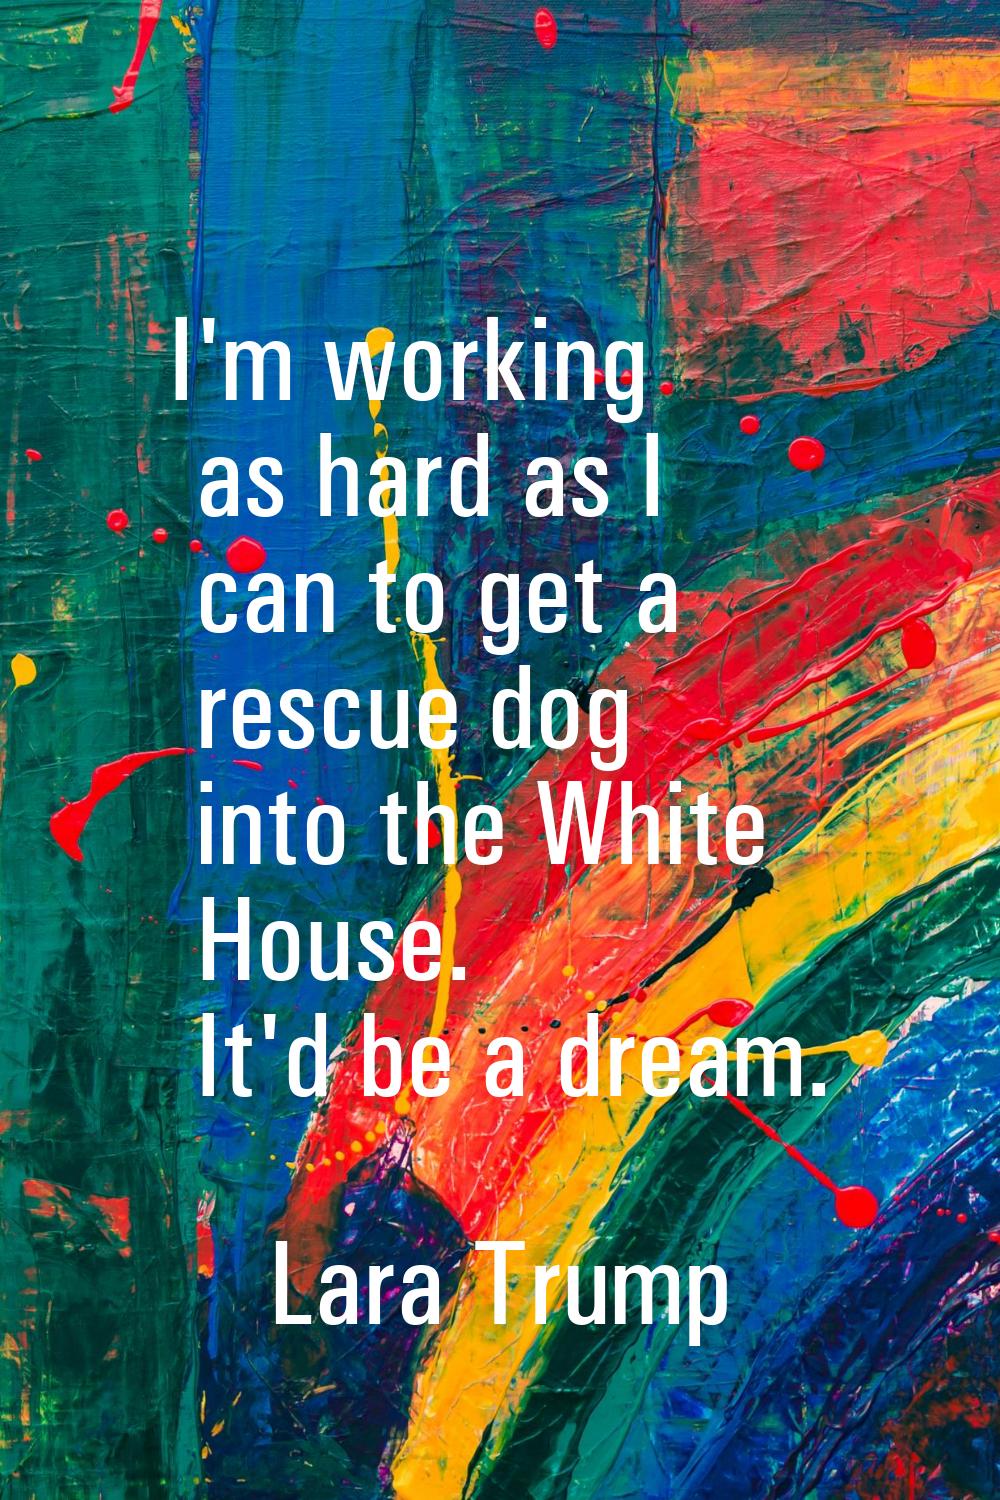 I'm working as hard as I can to get a rescue dog into the White House. It'd be a dream.